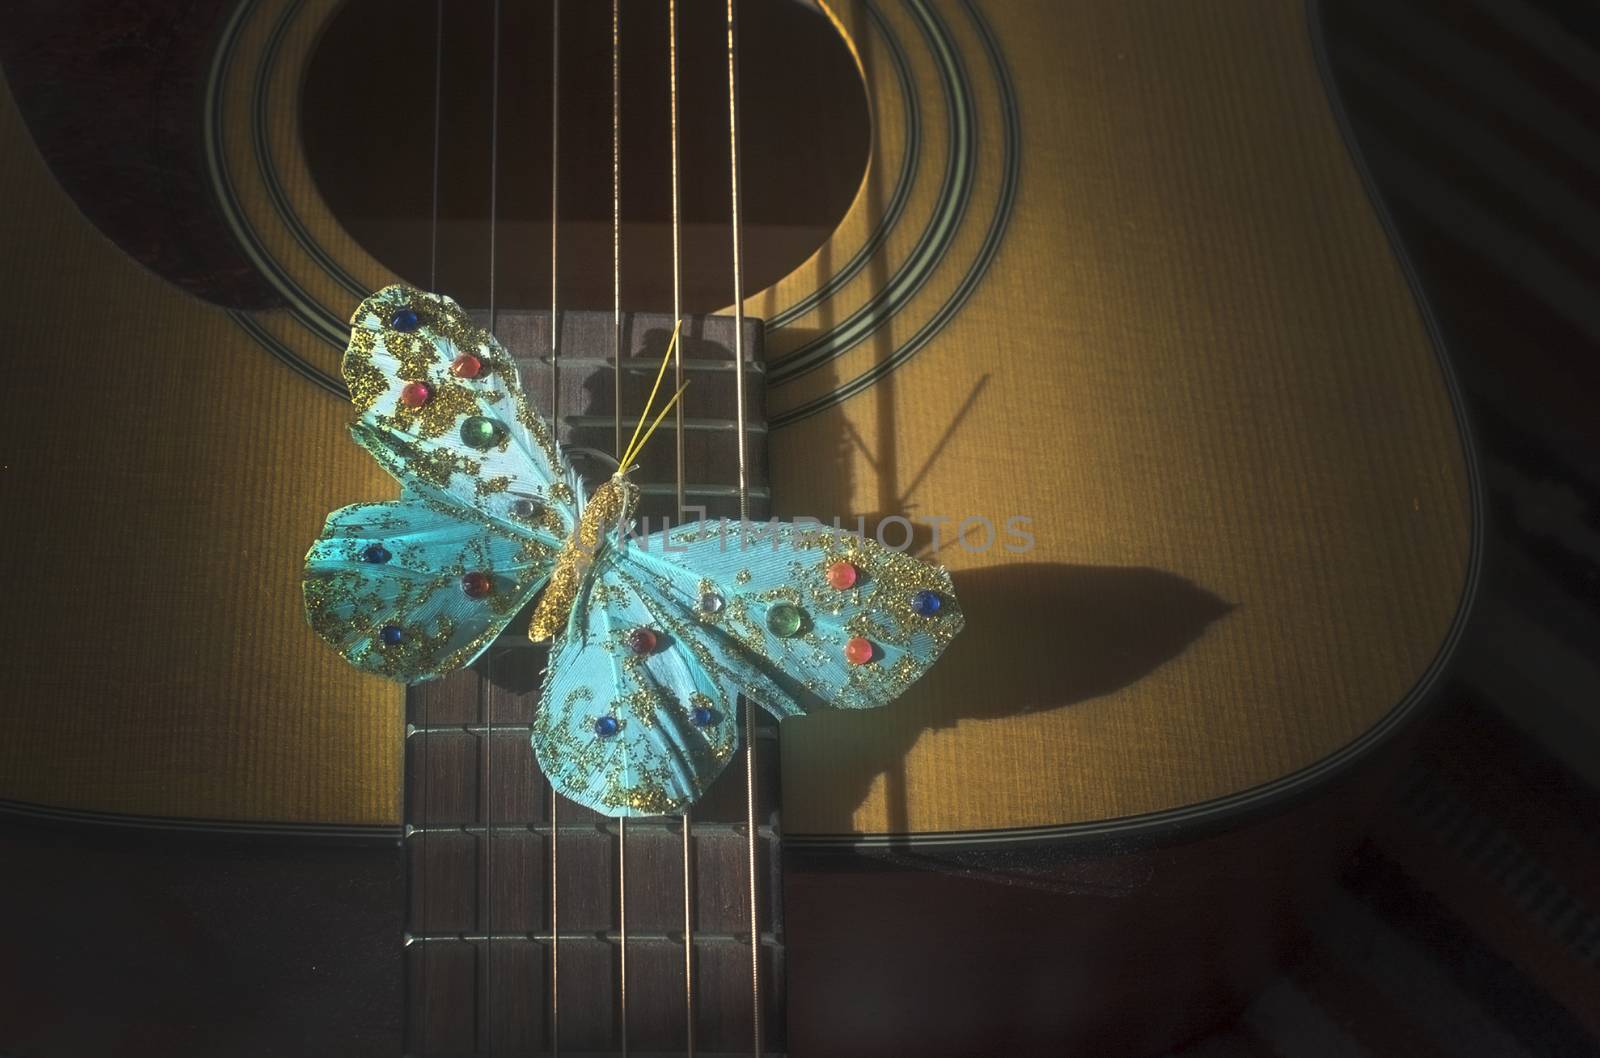 Turquoise butterfly on strings of acoustic guitar, concept for poetry, musicality, singer songwriter creativity.